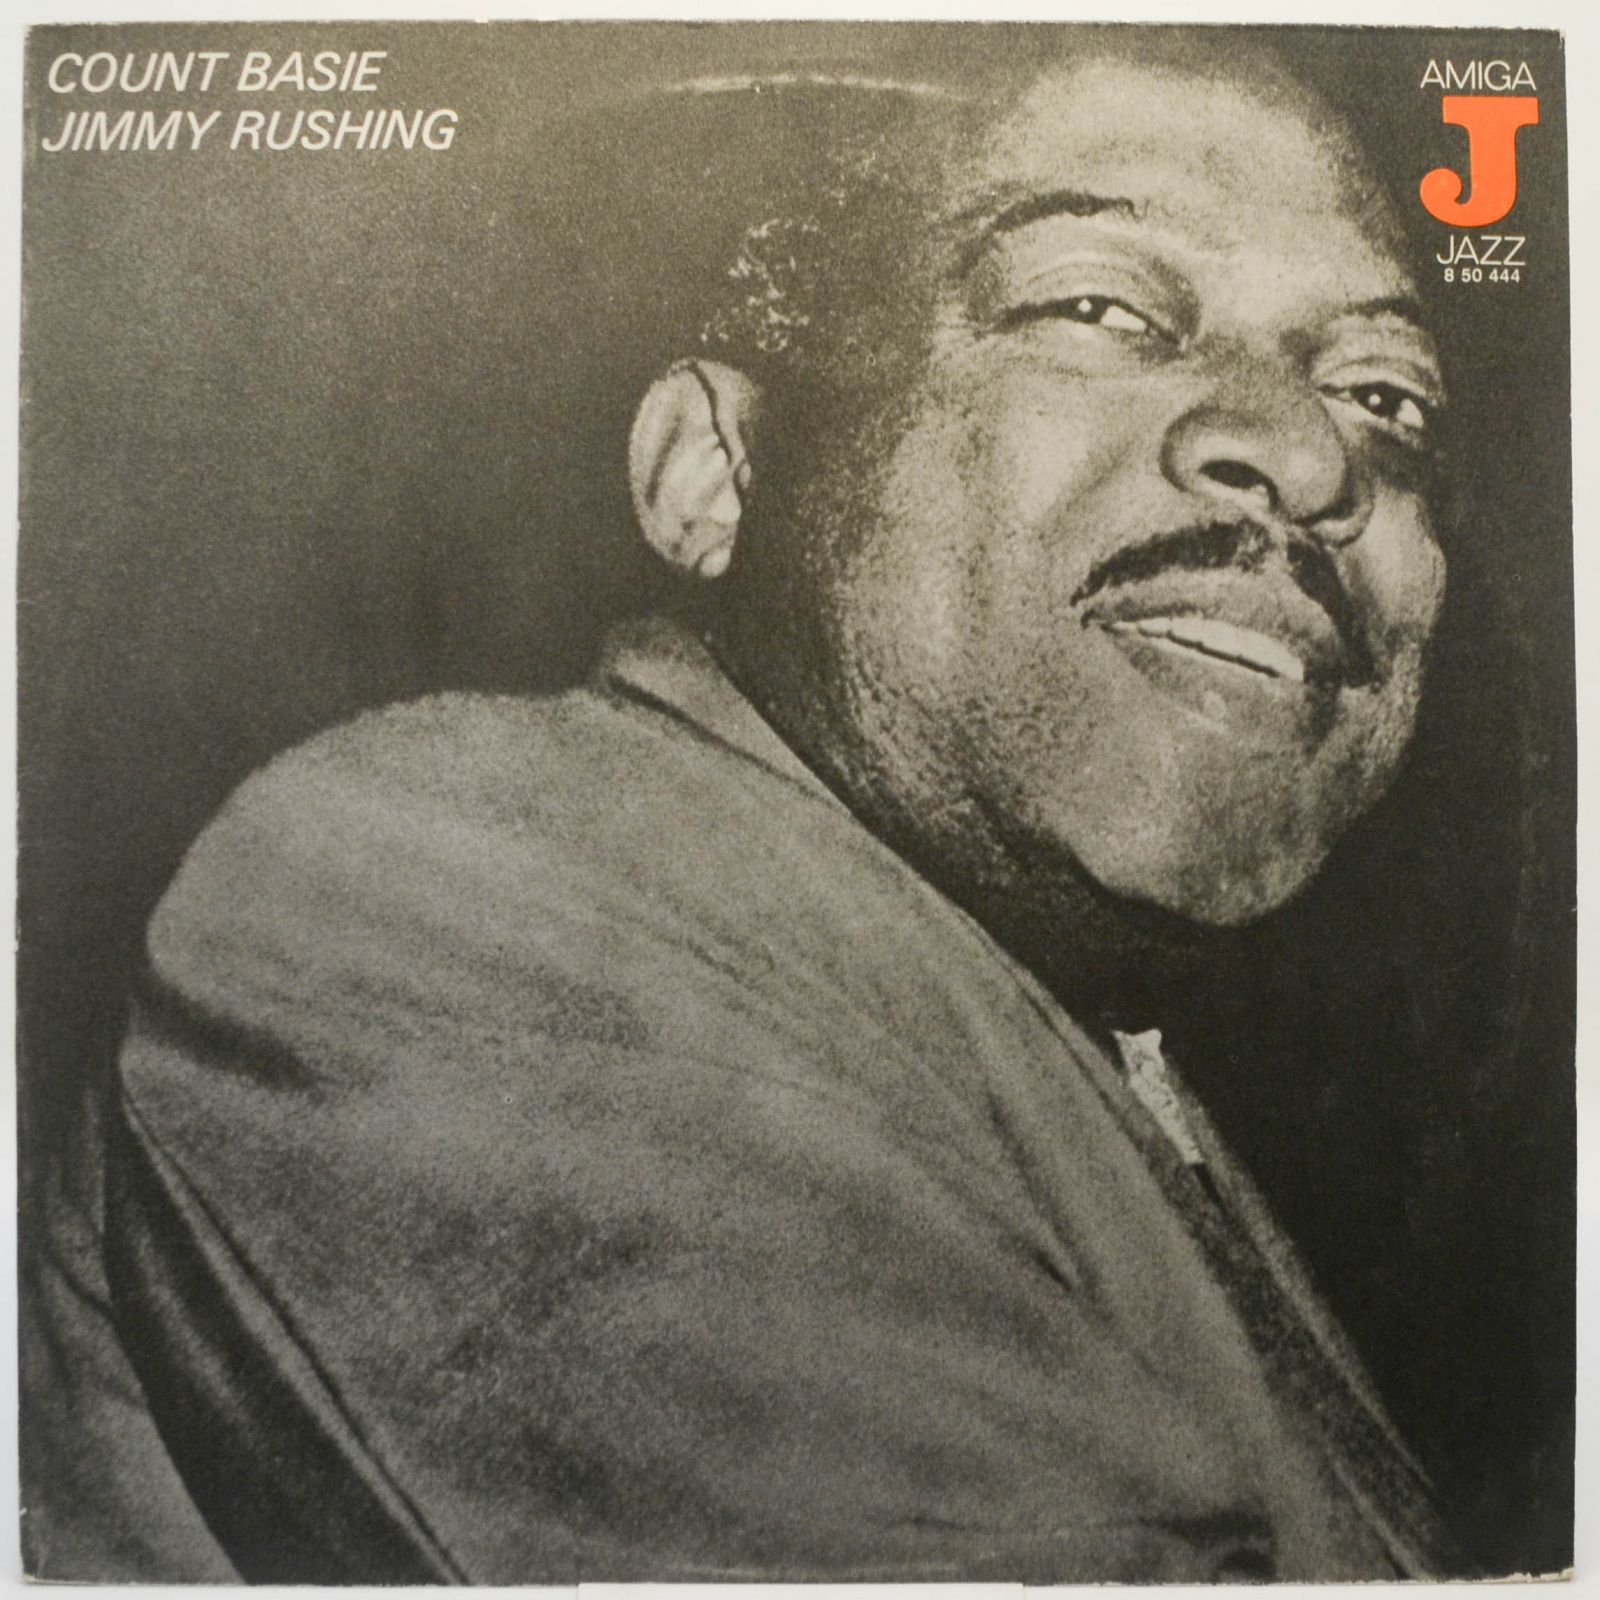 Count Basie - Jimmy Rushing (1947 - 1949), 1977